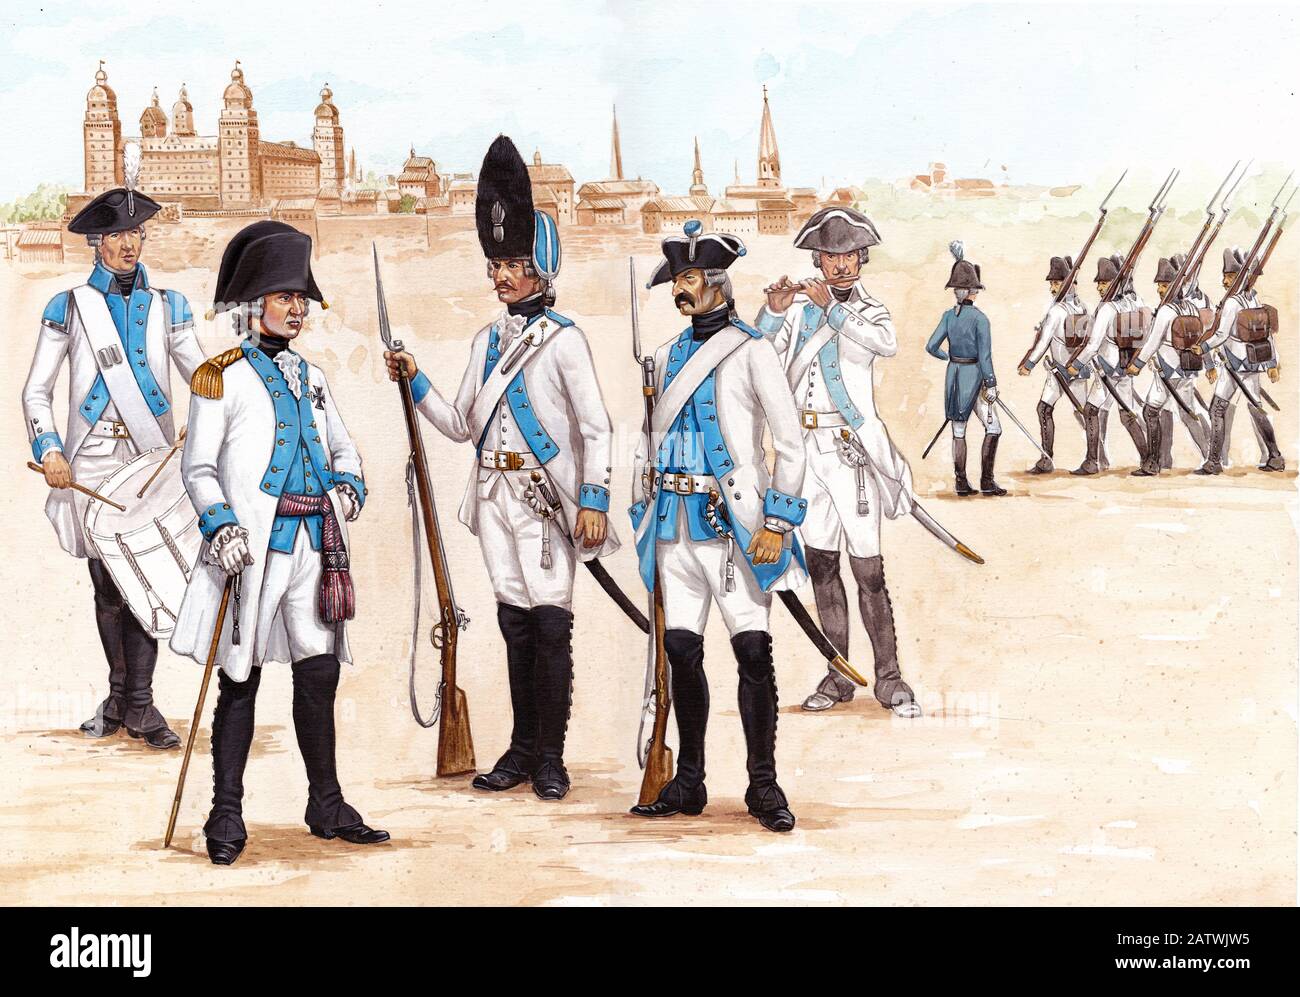 German infantry regiment illustration. Soldiers and officers before the battle. Military uniform illustration. Stock Photo